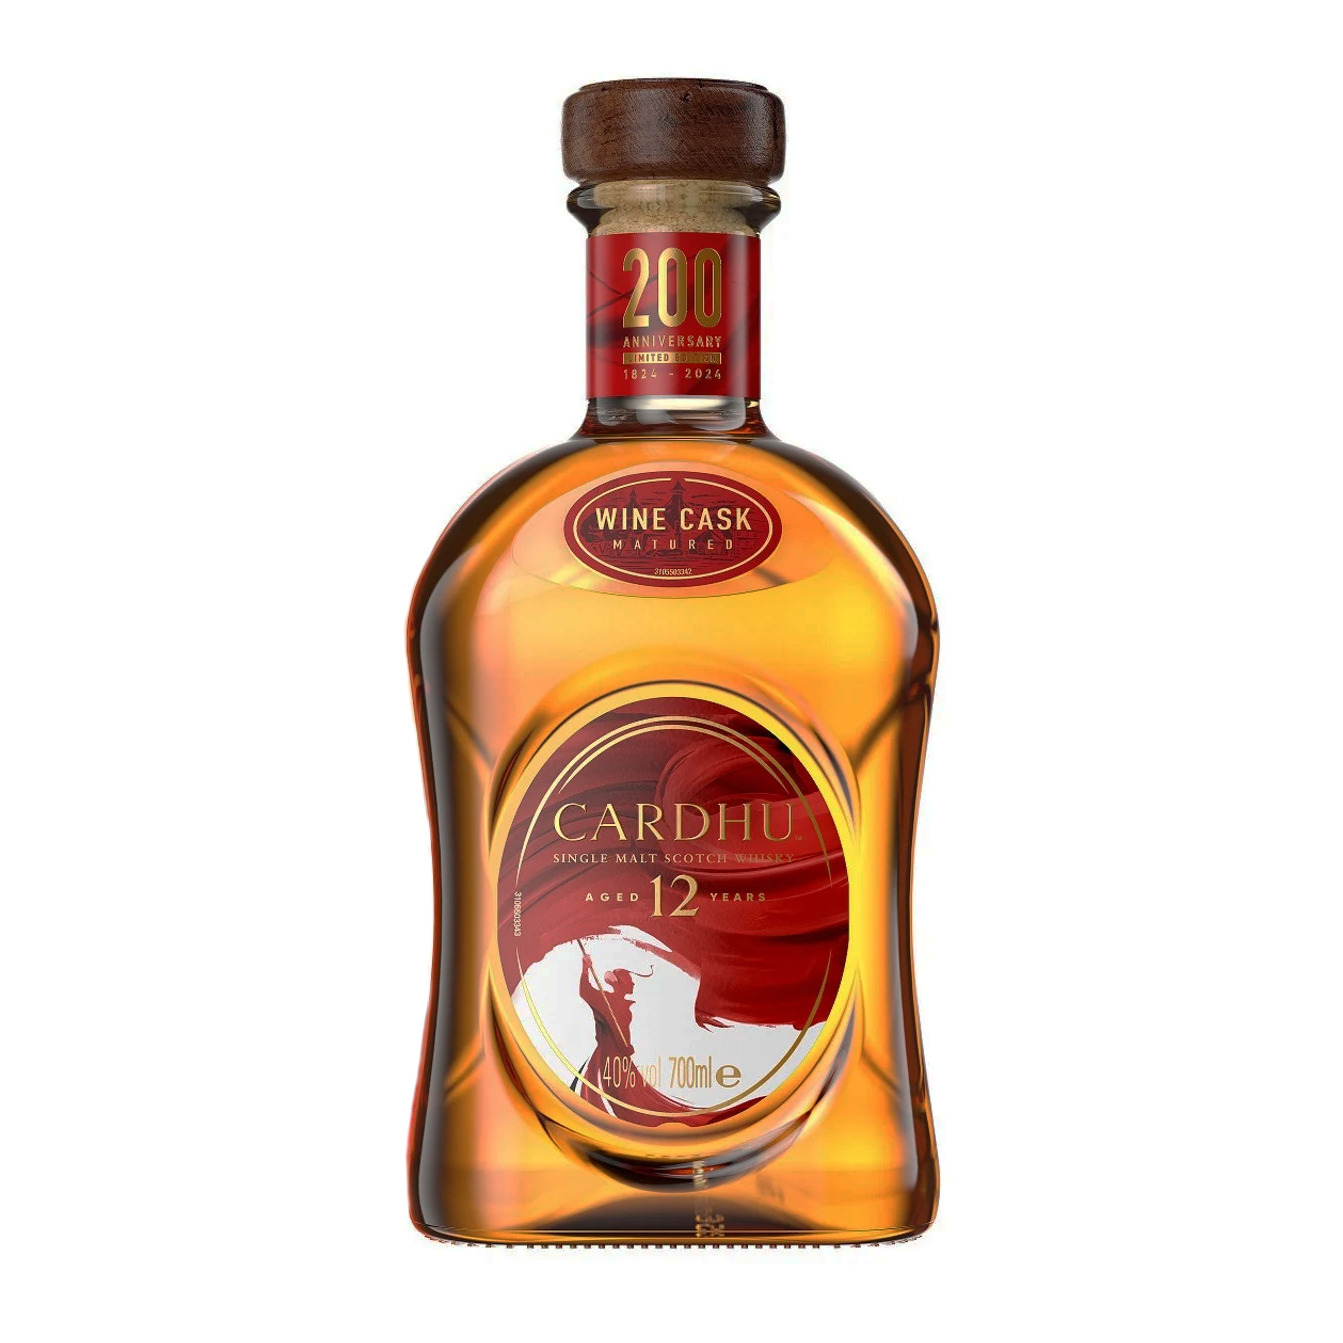 Cardhu, 12 years - 200th Anniversary Limited Edition 70cl